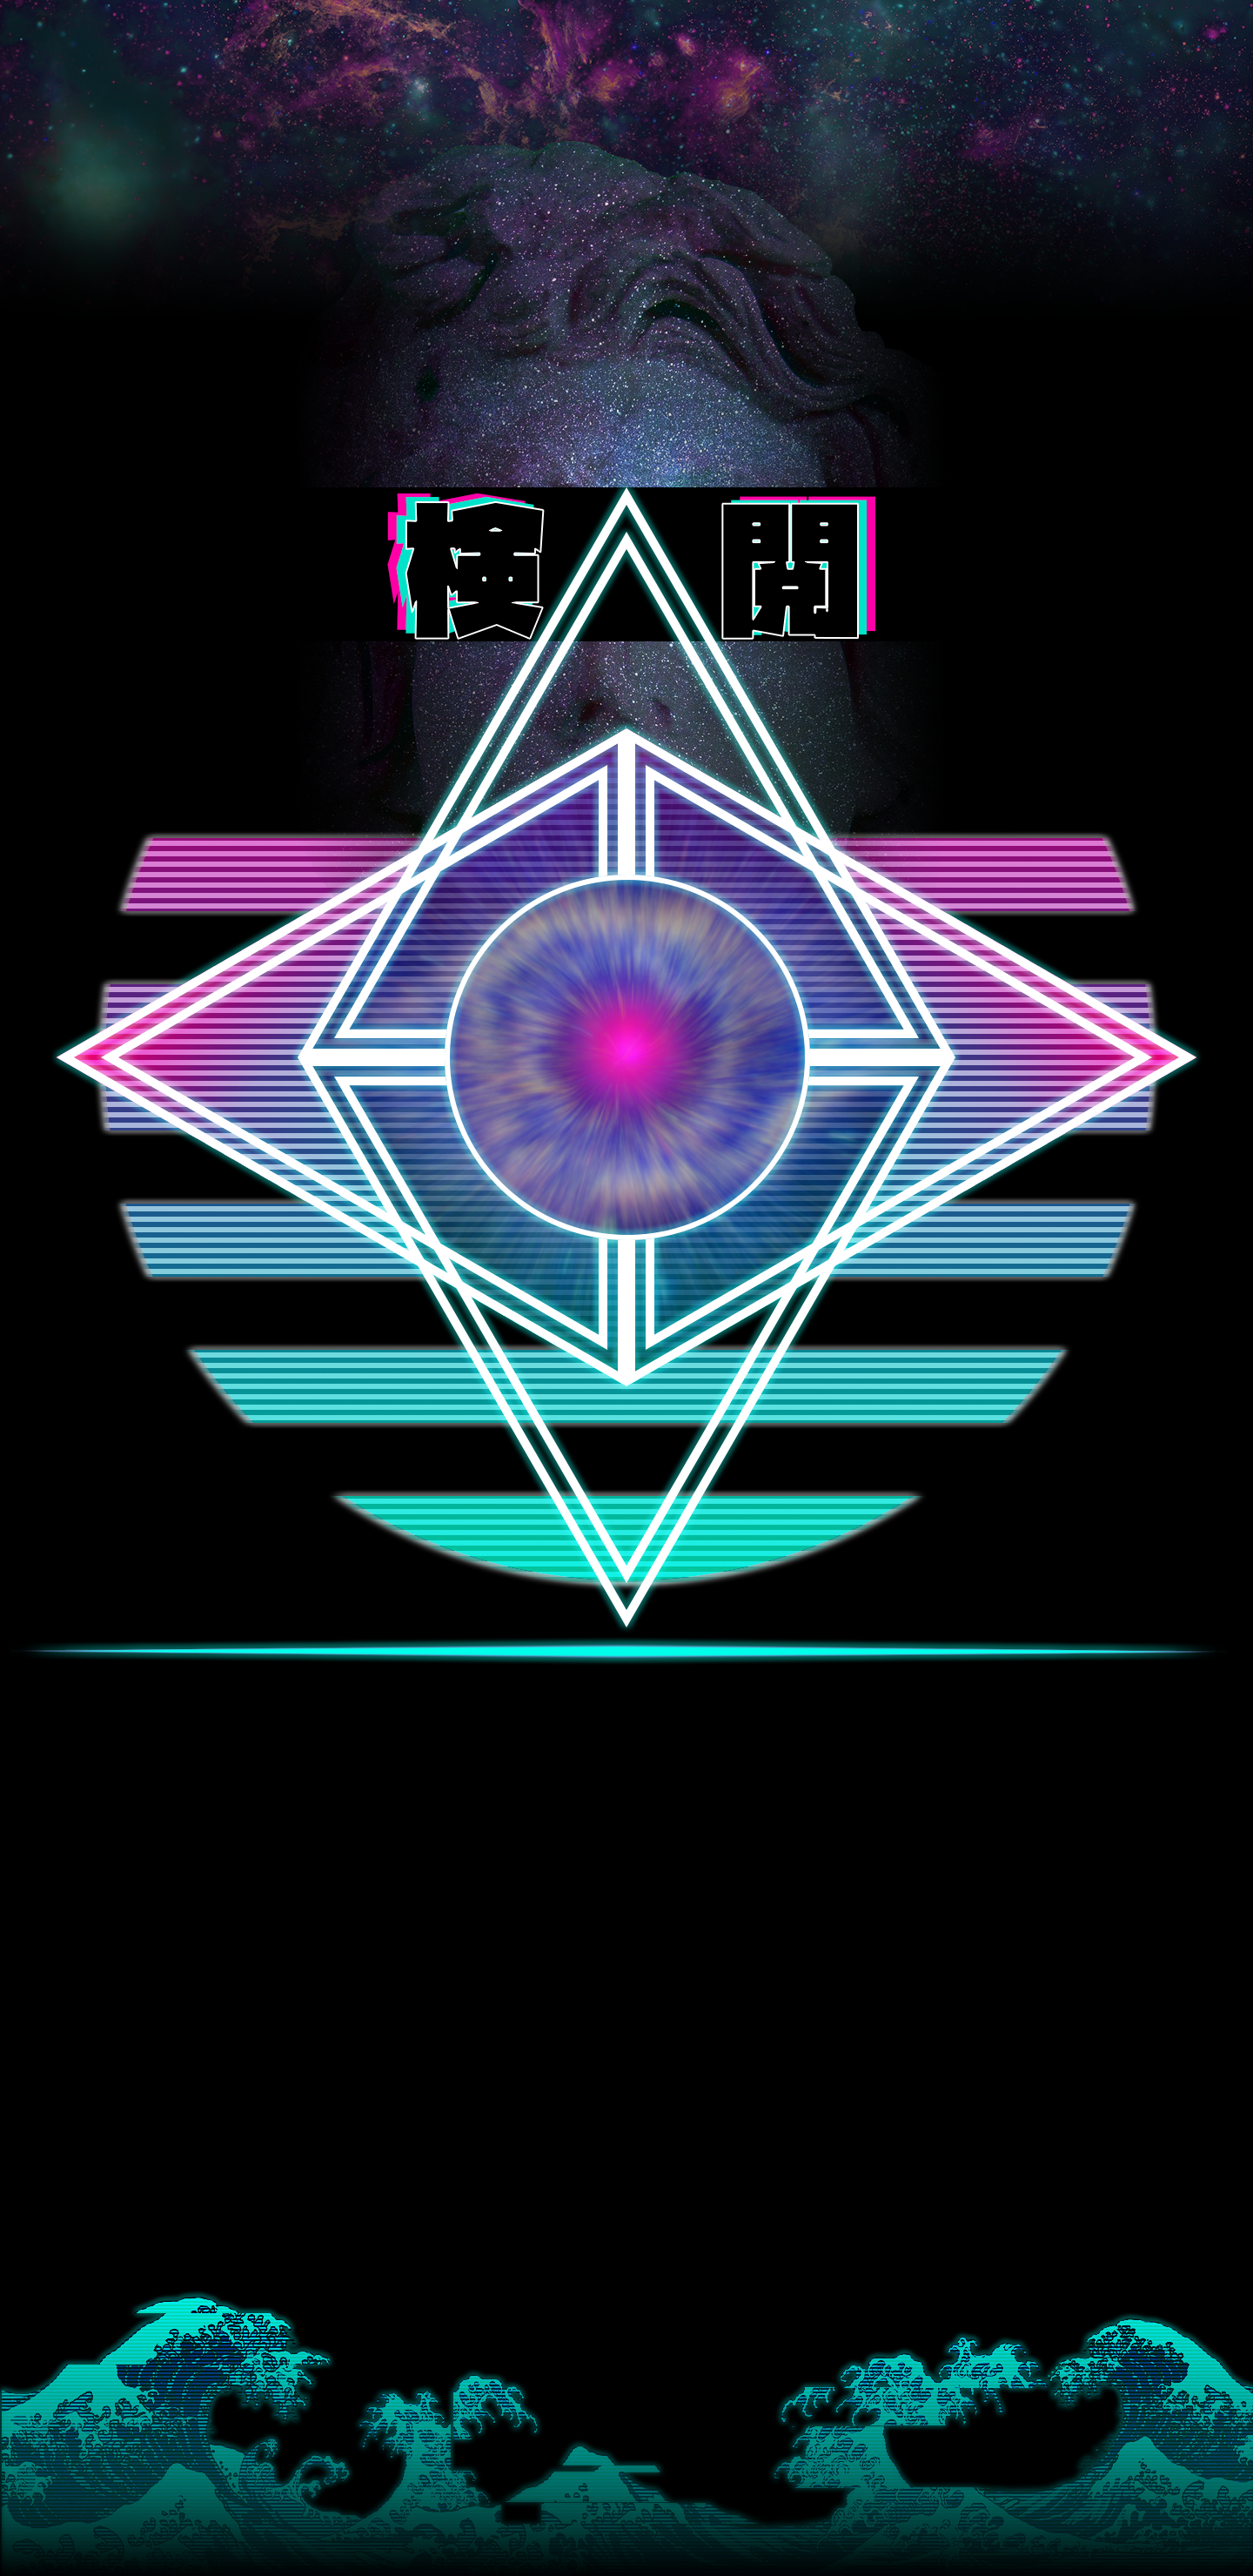 This Is An AMOLED Outrun Vaporwave Styled Background